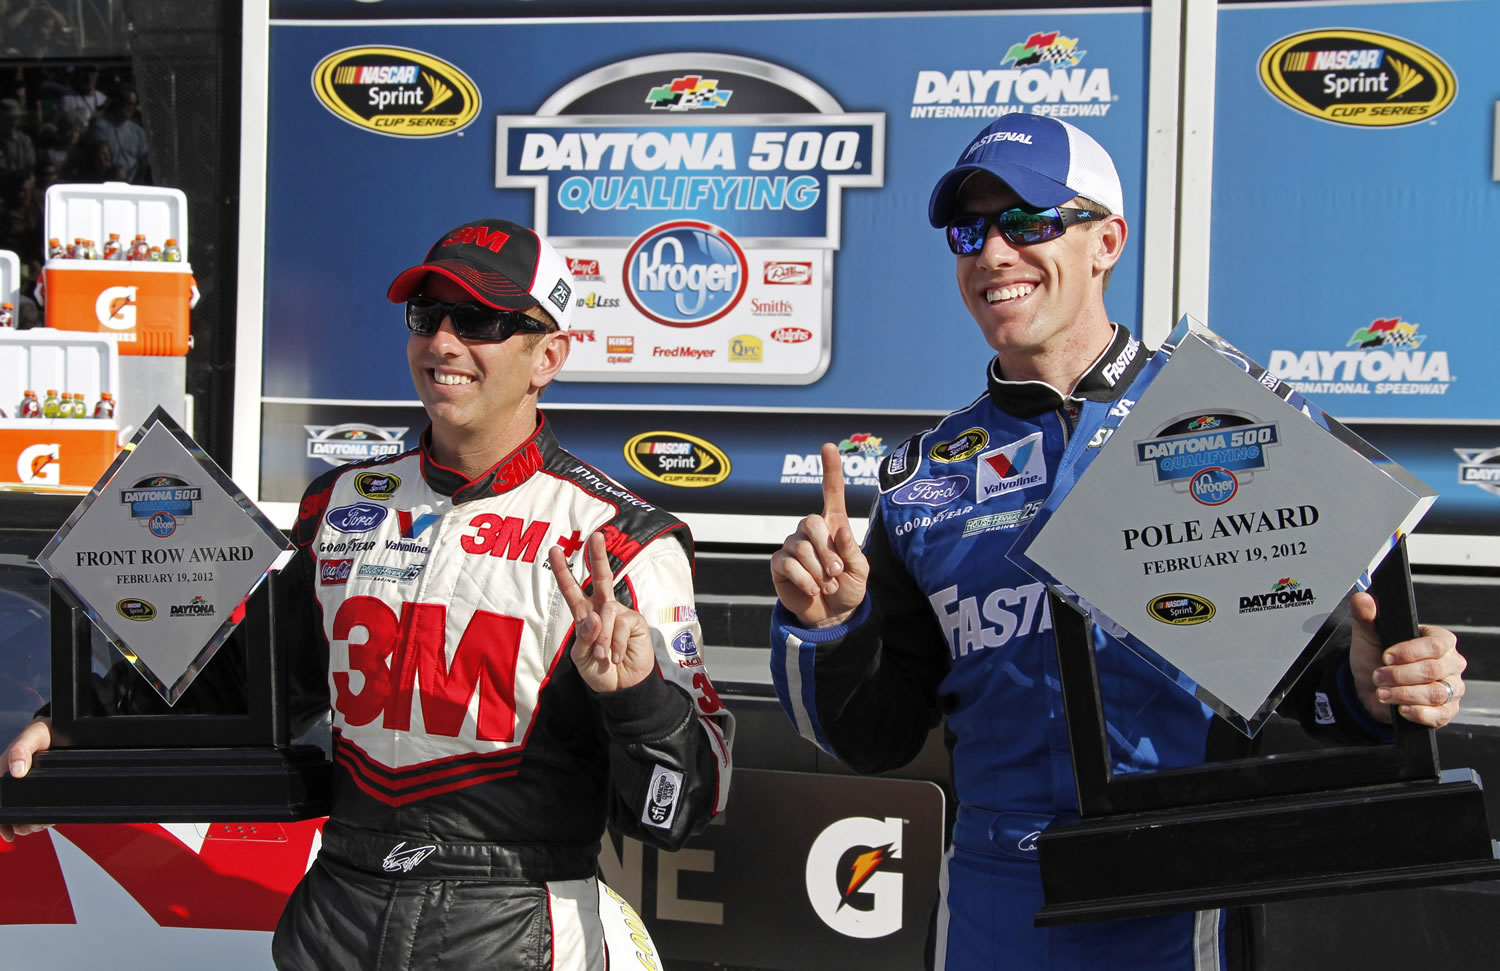 Greg Bifflle, left, of Vancouver, and Carl Edwards, right, hold up their trophies after securing the top two positions during qualifying for the NASCAR Daytona 500 on Sunday. Edwards won the pole for the Feb.